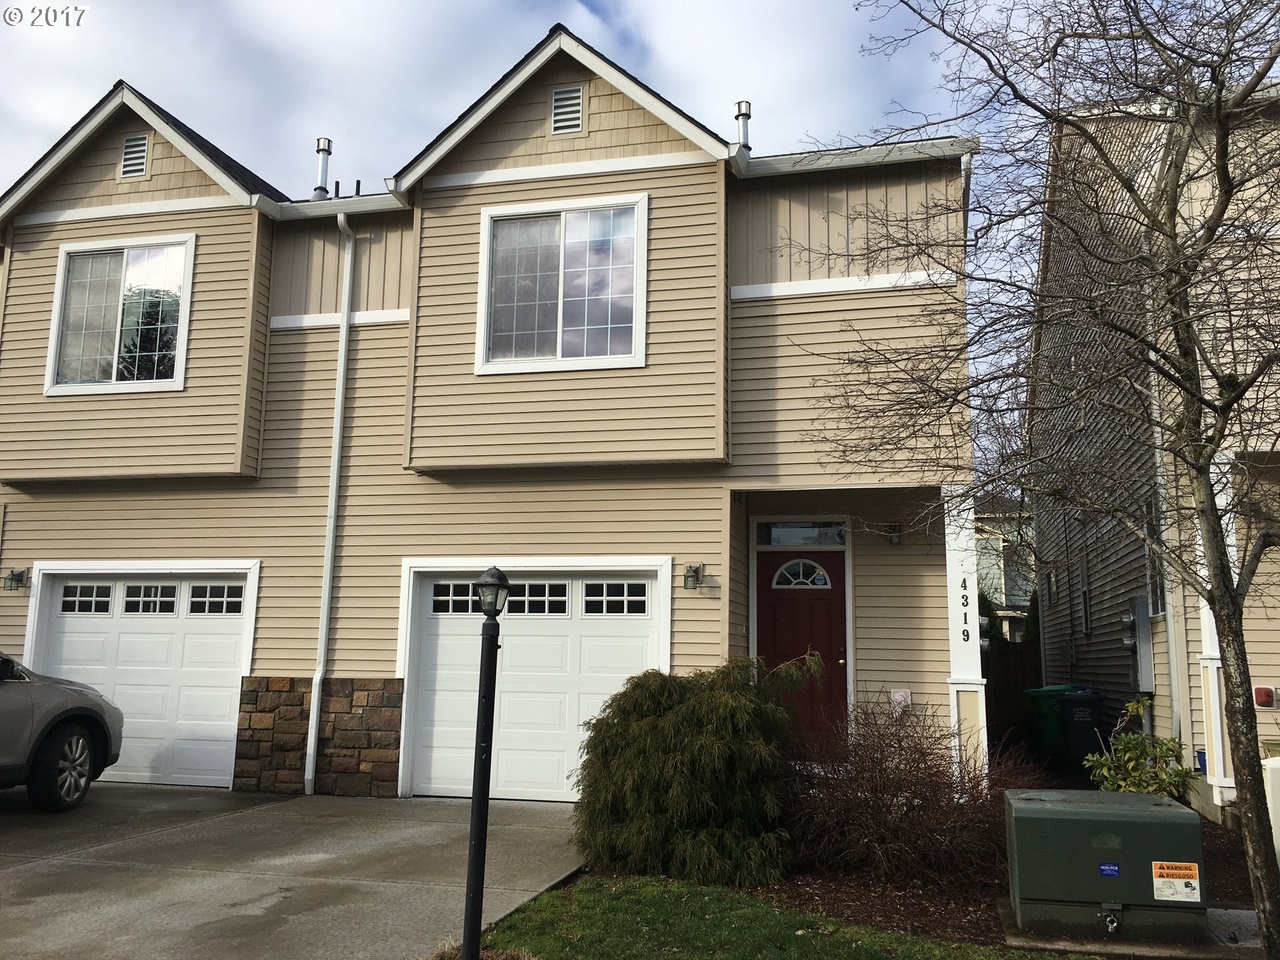 4319 SE 79th Ave, Portland, OR 97206 | MLS# 17468329 | Redfin